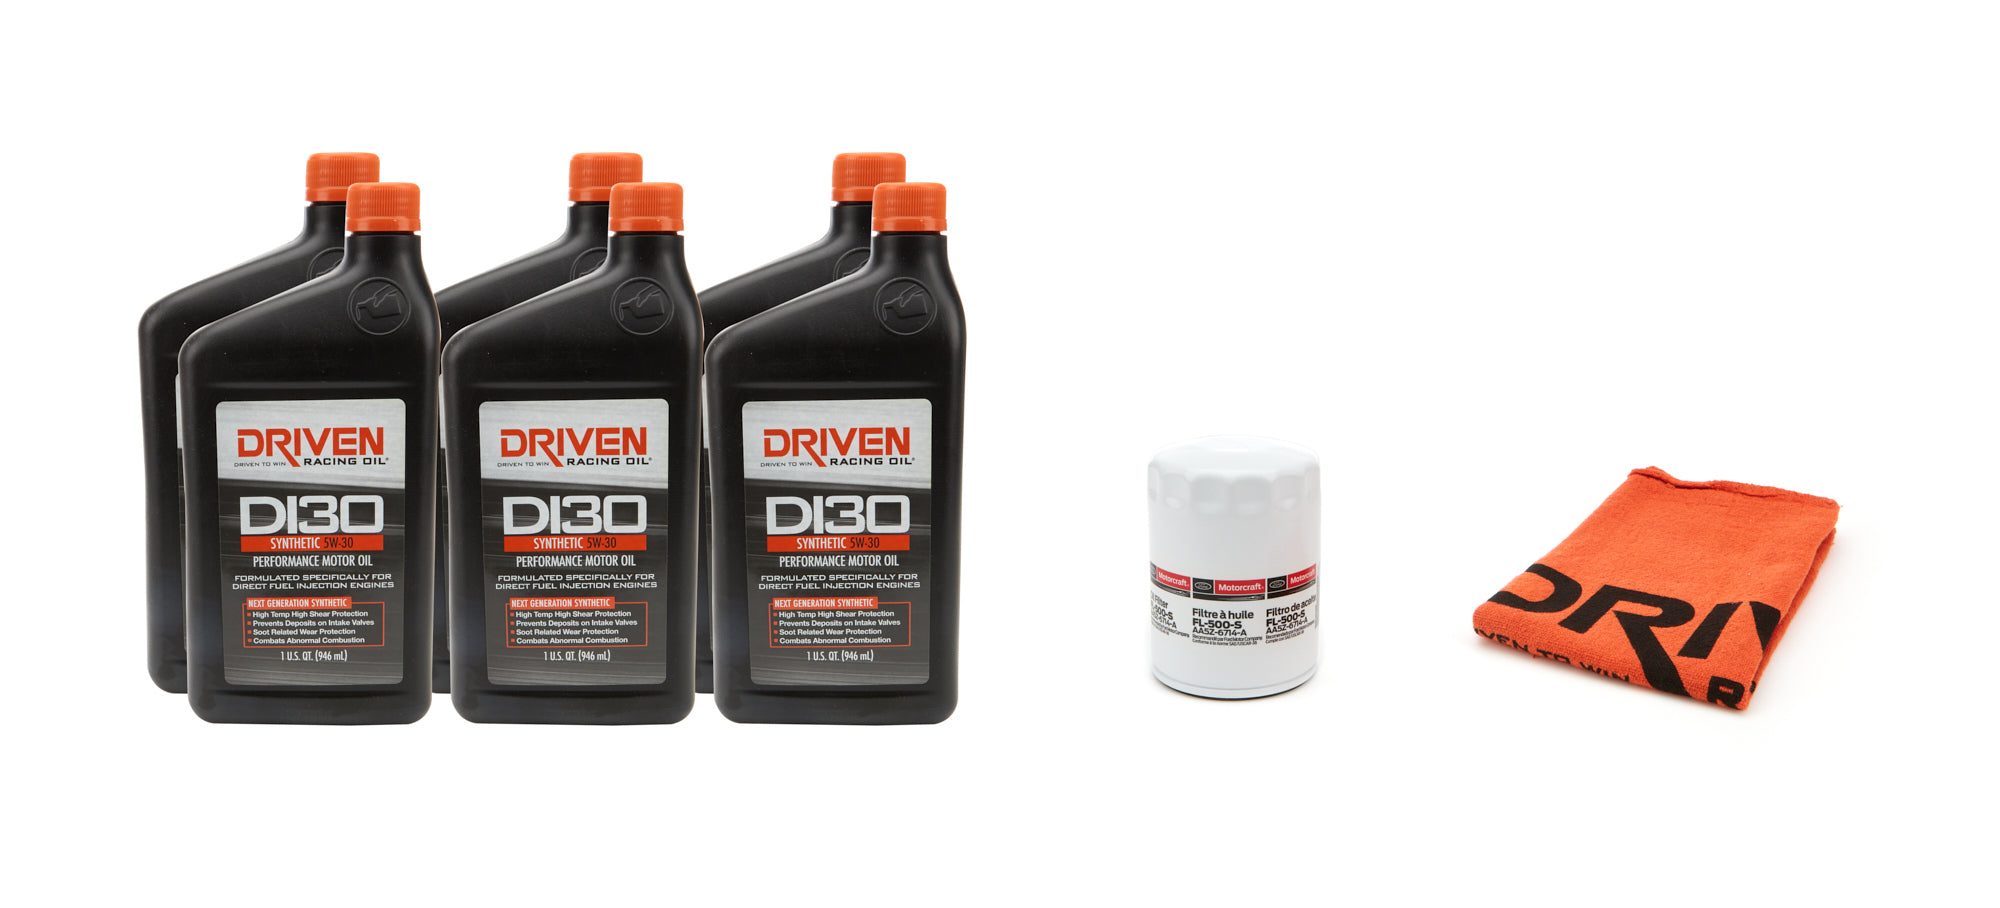 Driven Racing Oil 5w30 Oil Change Kit 11- 15 Ford F150 3.5L 6Qt. Oils, Fluids and Additives Motor Oil main image